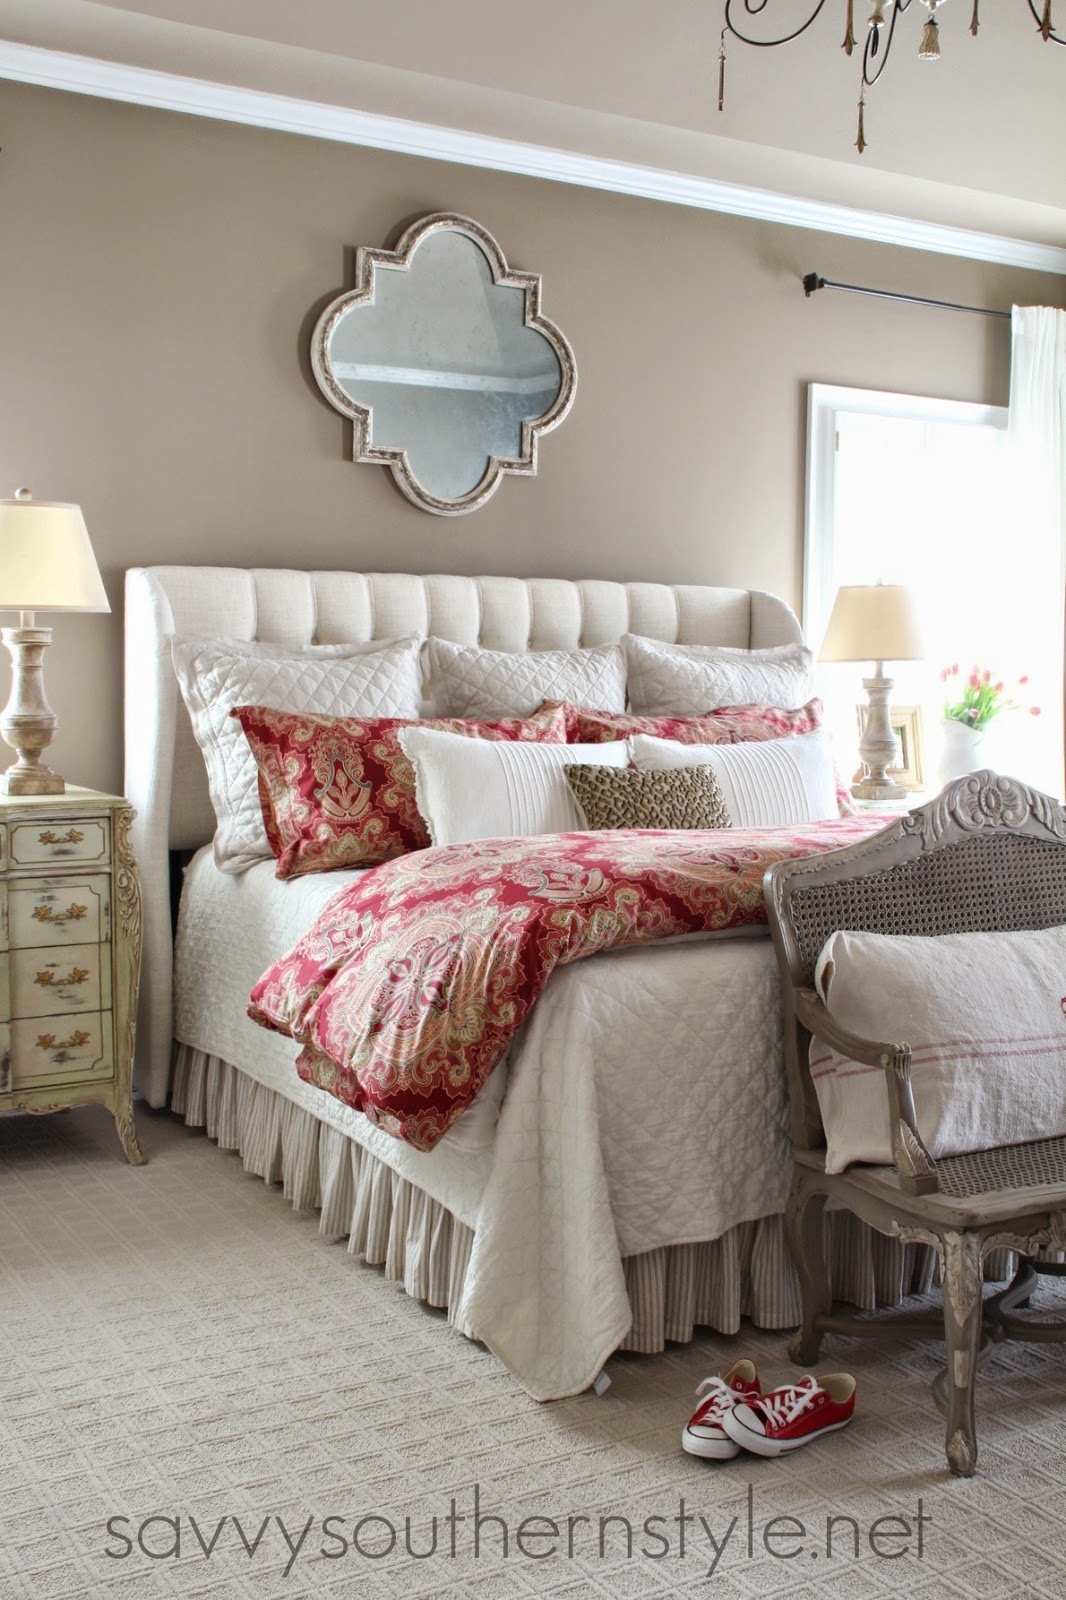 Savvy Southern Style : My Home\u002639;s Paint Colors